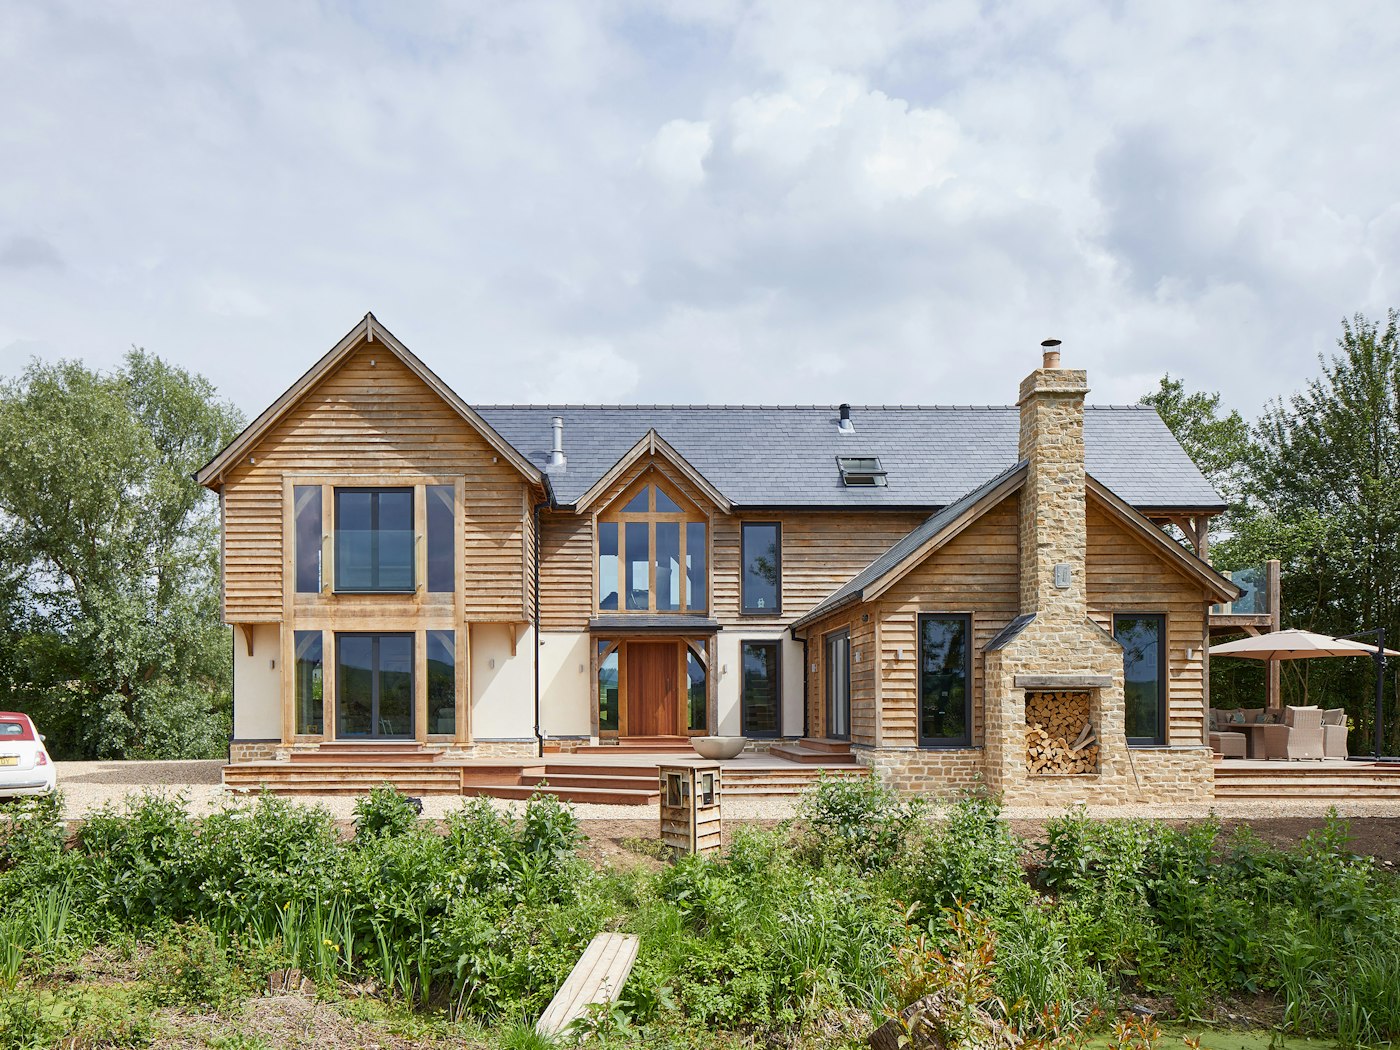 Grand but traditional styling - this oak house features an iroko front door by Urban Front 